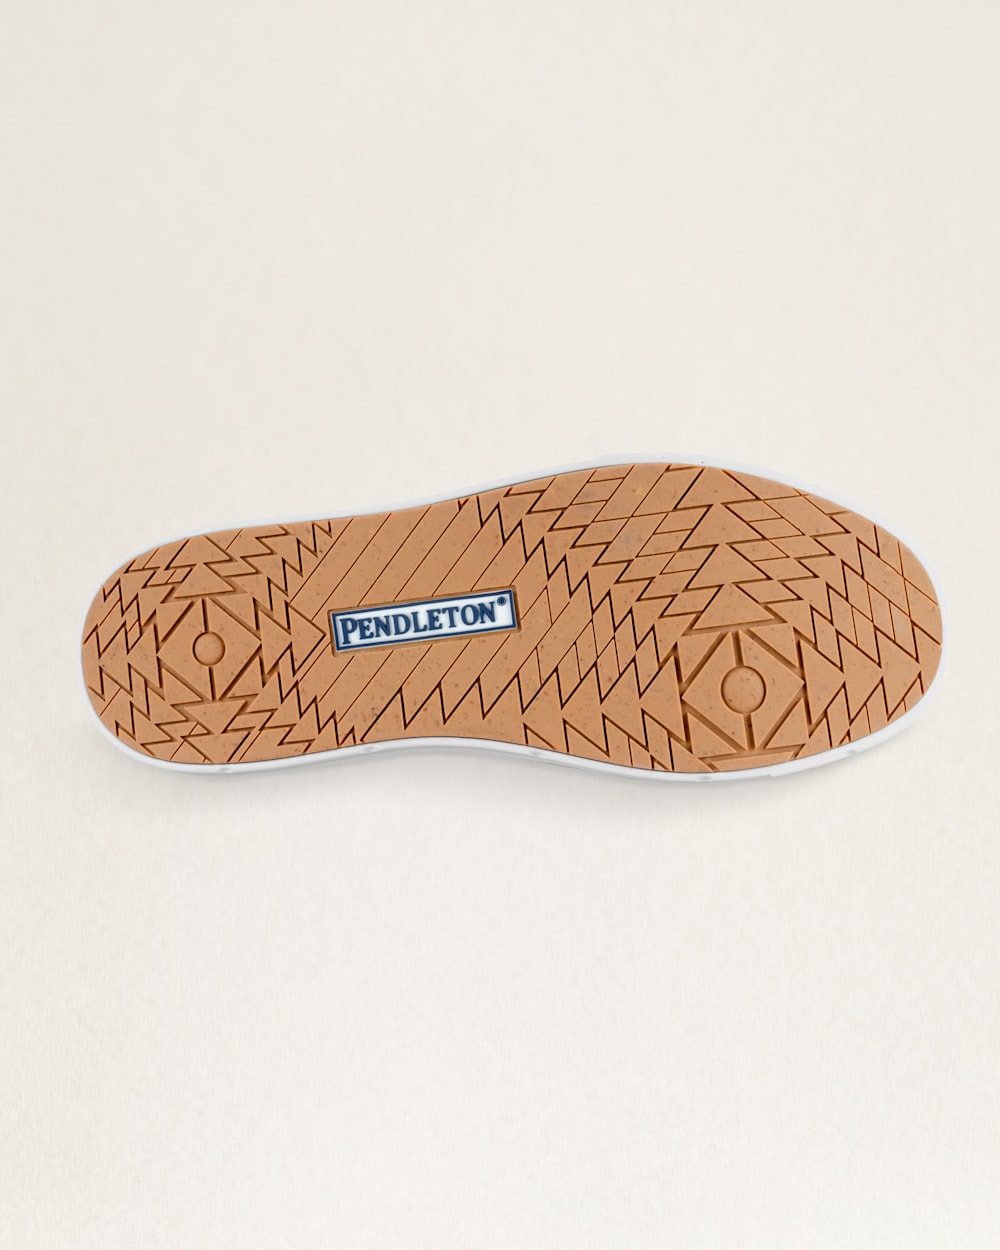 ALTERNATE VIEW OF WOMEN'S SLIP-ON SHOES IN RALSTON MULTI STRIPE image number 4